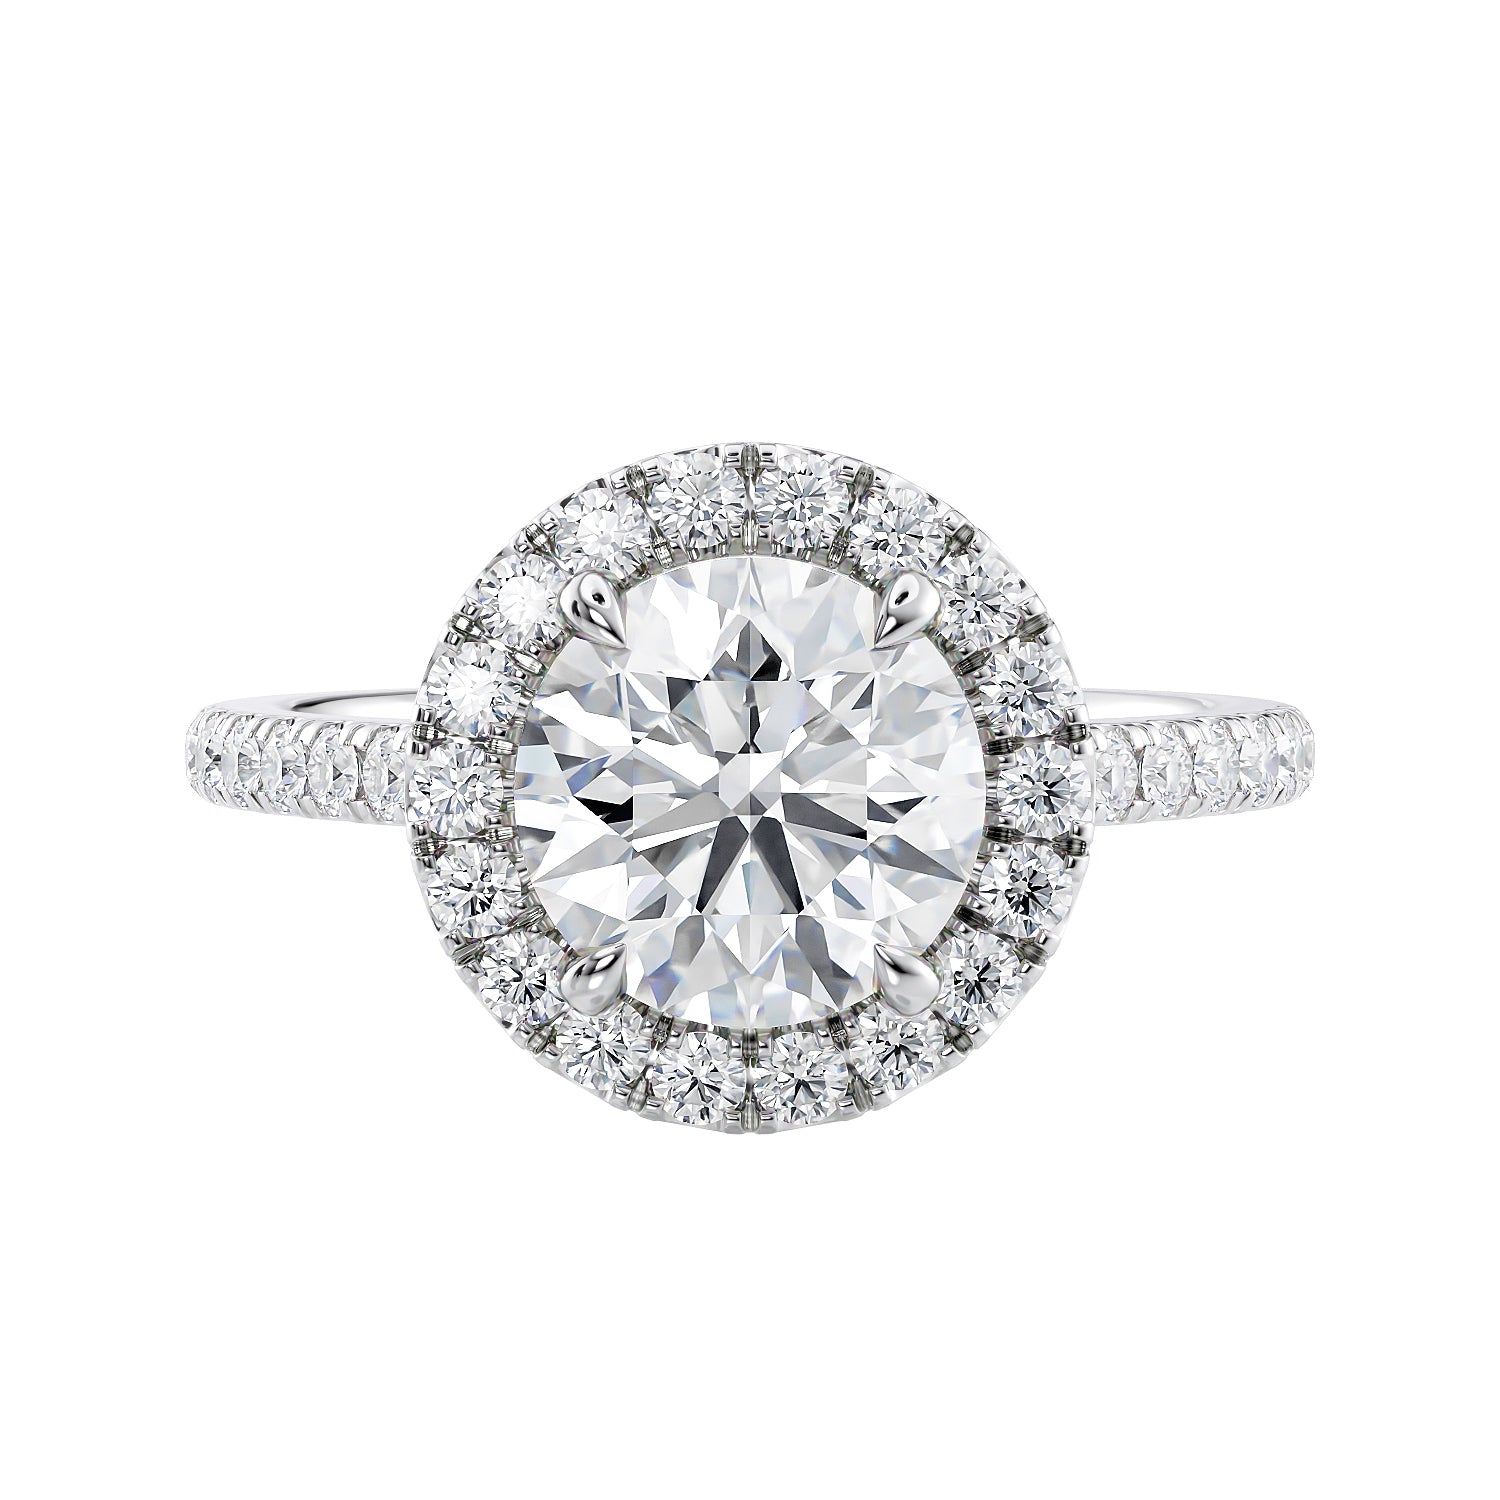 Round natural halo diamond engagement ring white gold front view.